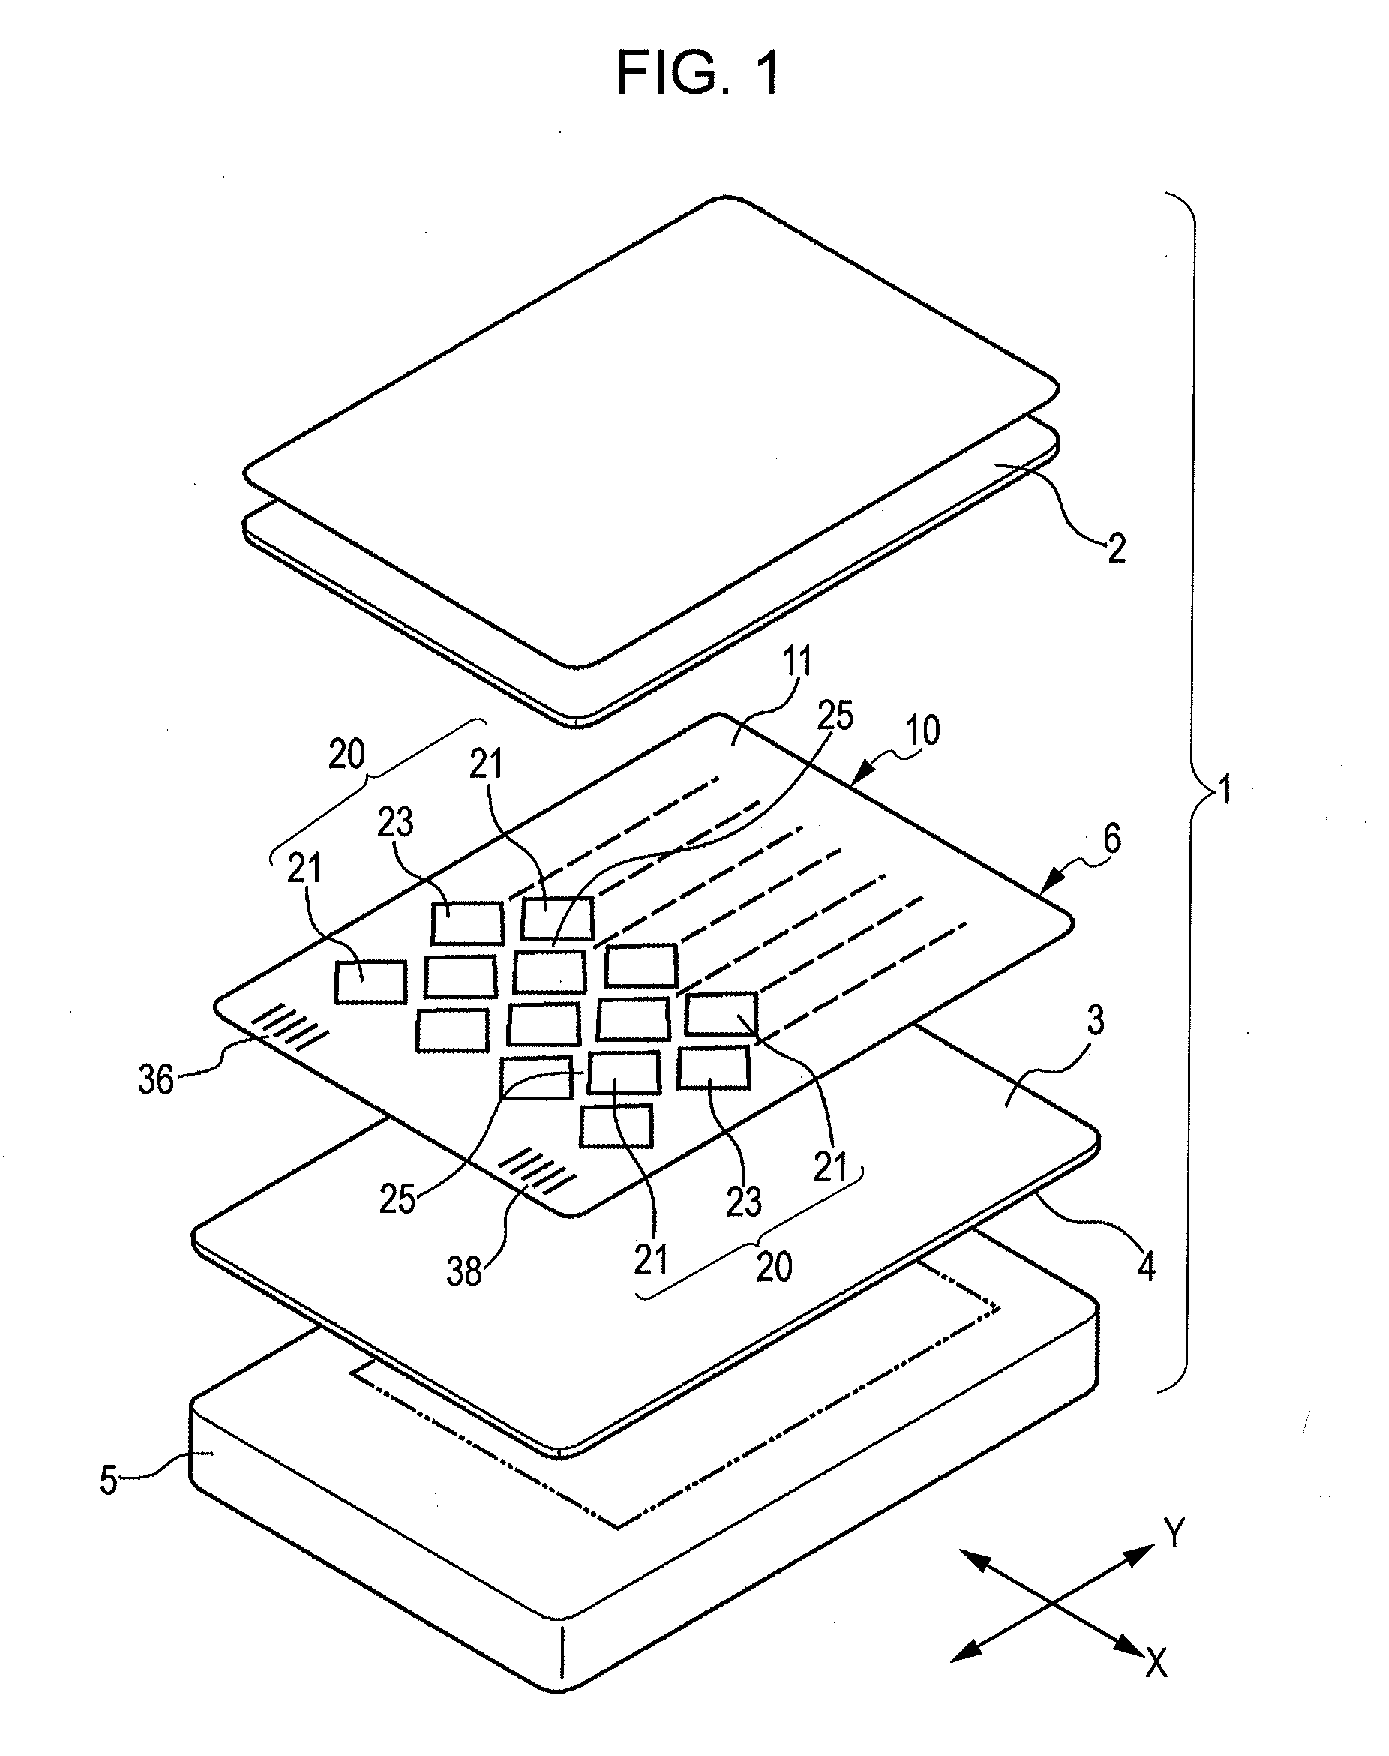 Light transmitting electrically conductive member and method for patterning the same